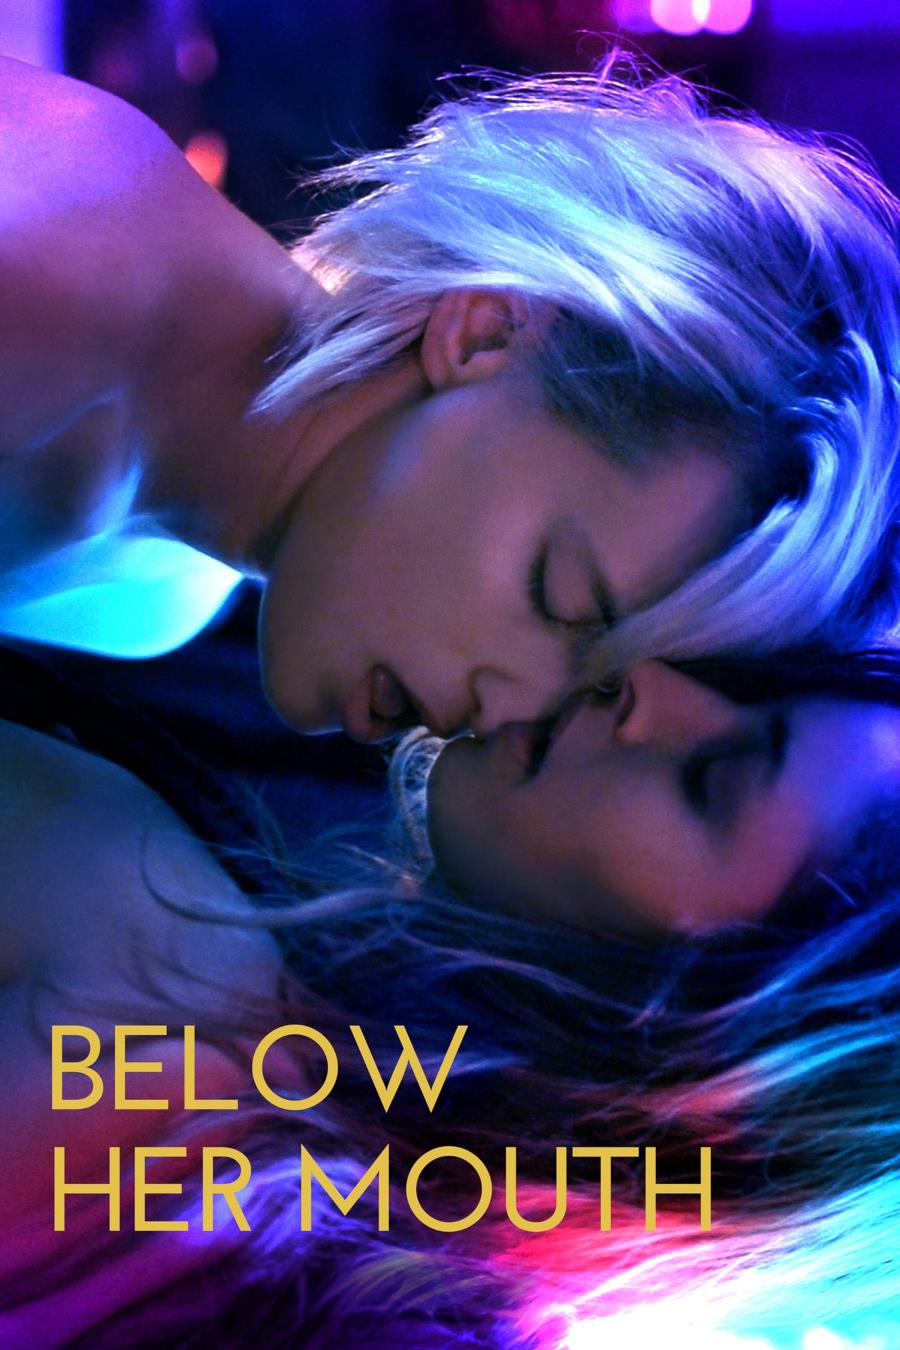 BELOW HER MOUTH (2016)(1). BELOW HER MOUTH (2016)